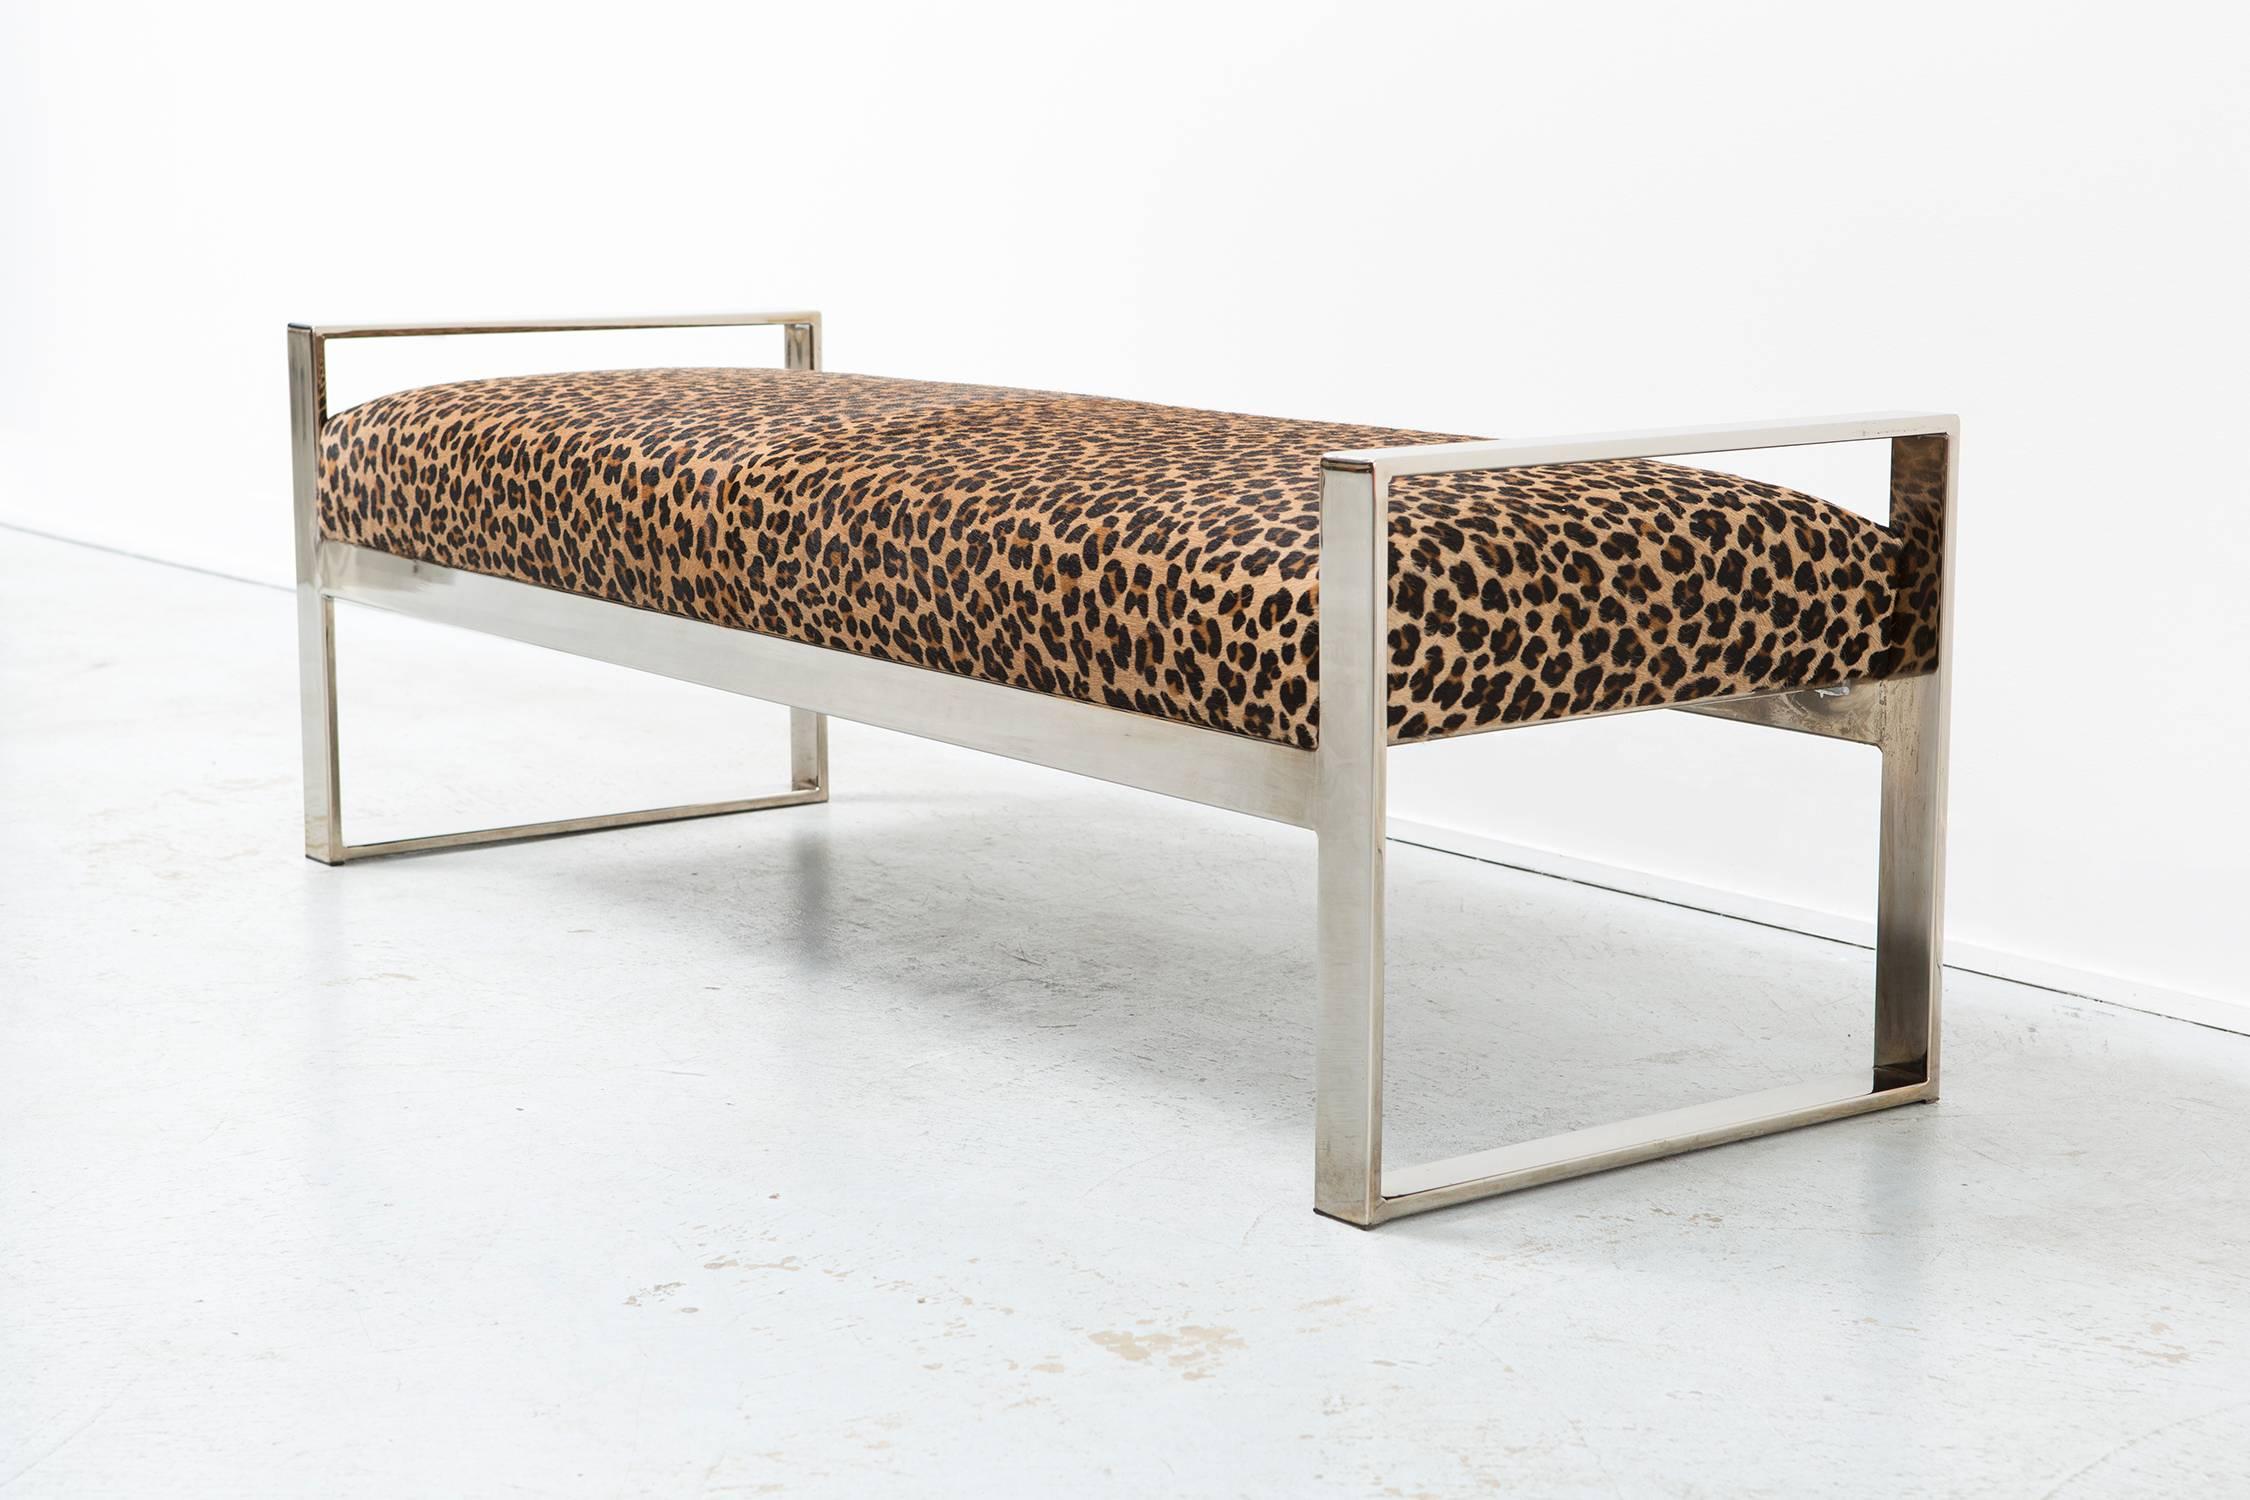 Bench

designed by Milo Baughman,

USA, circa 1970s.

Reupholstered in leopard patterned cowhide.

Measures: 18" H x 55" W x 20" D x seat 16 ½" H.